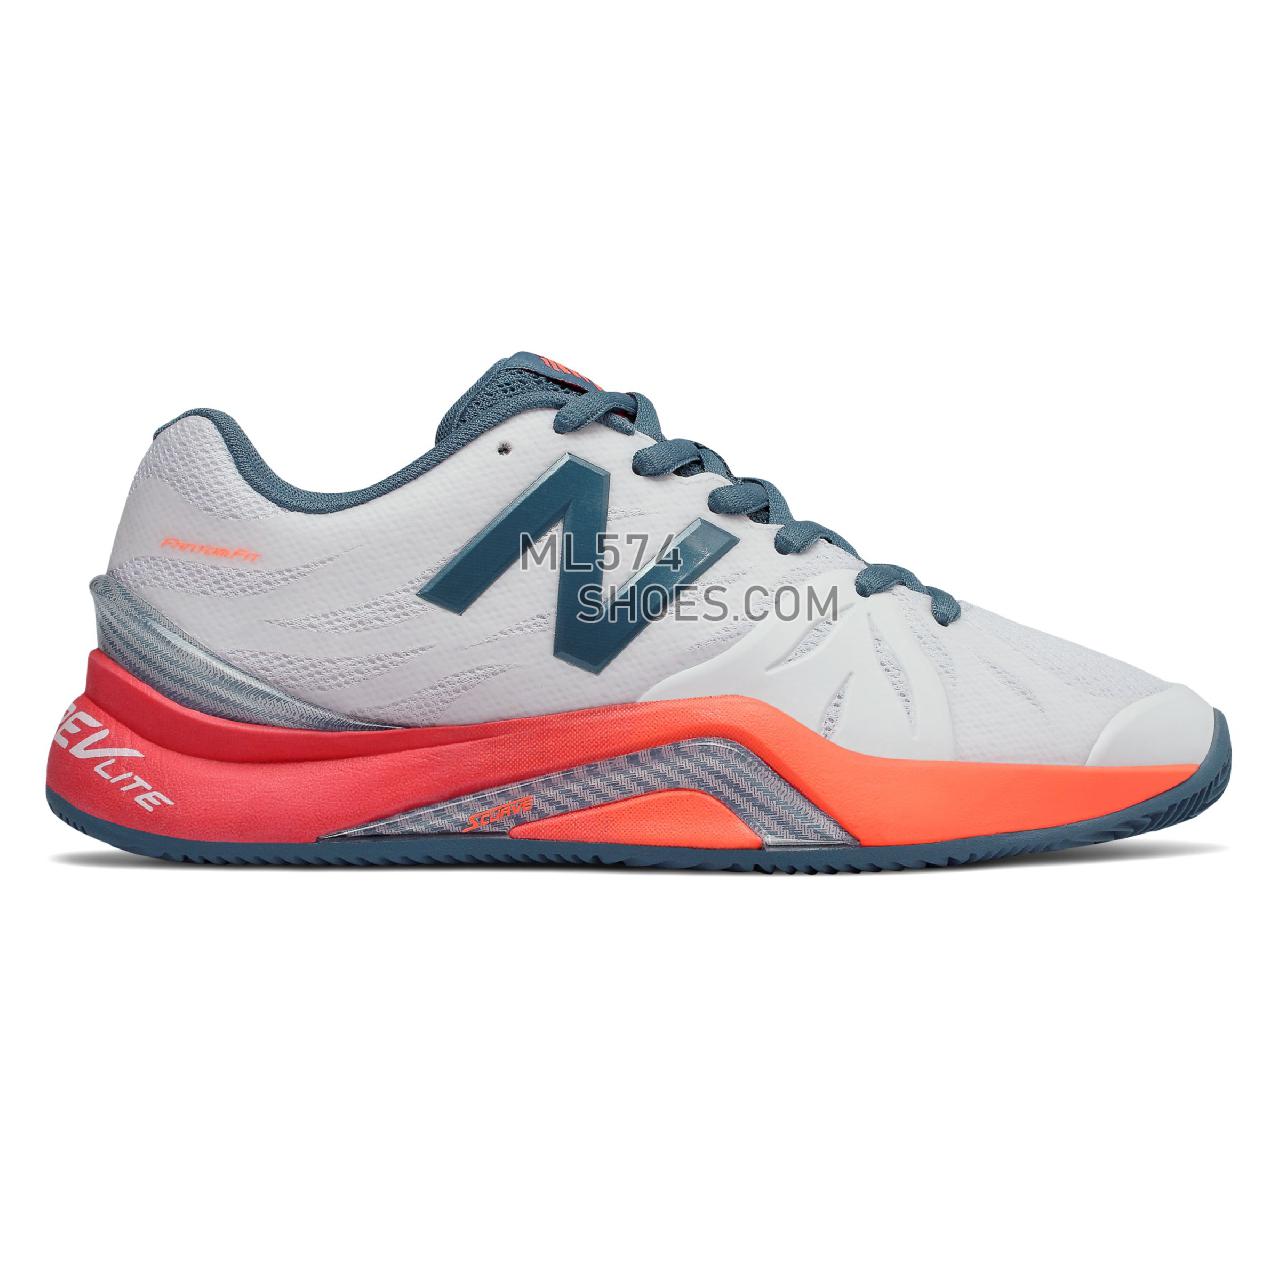 New Balance 1296v2 - Women's 1296 - Tennis / Court White with Dragonfly - WCH1296D